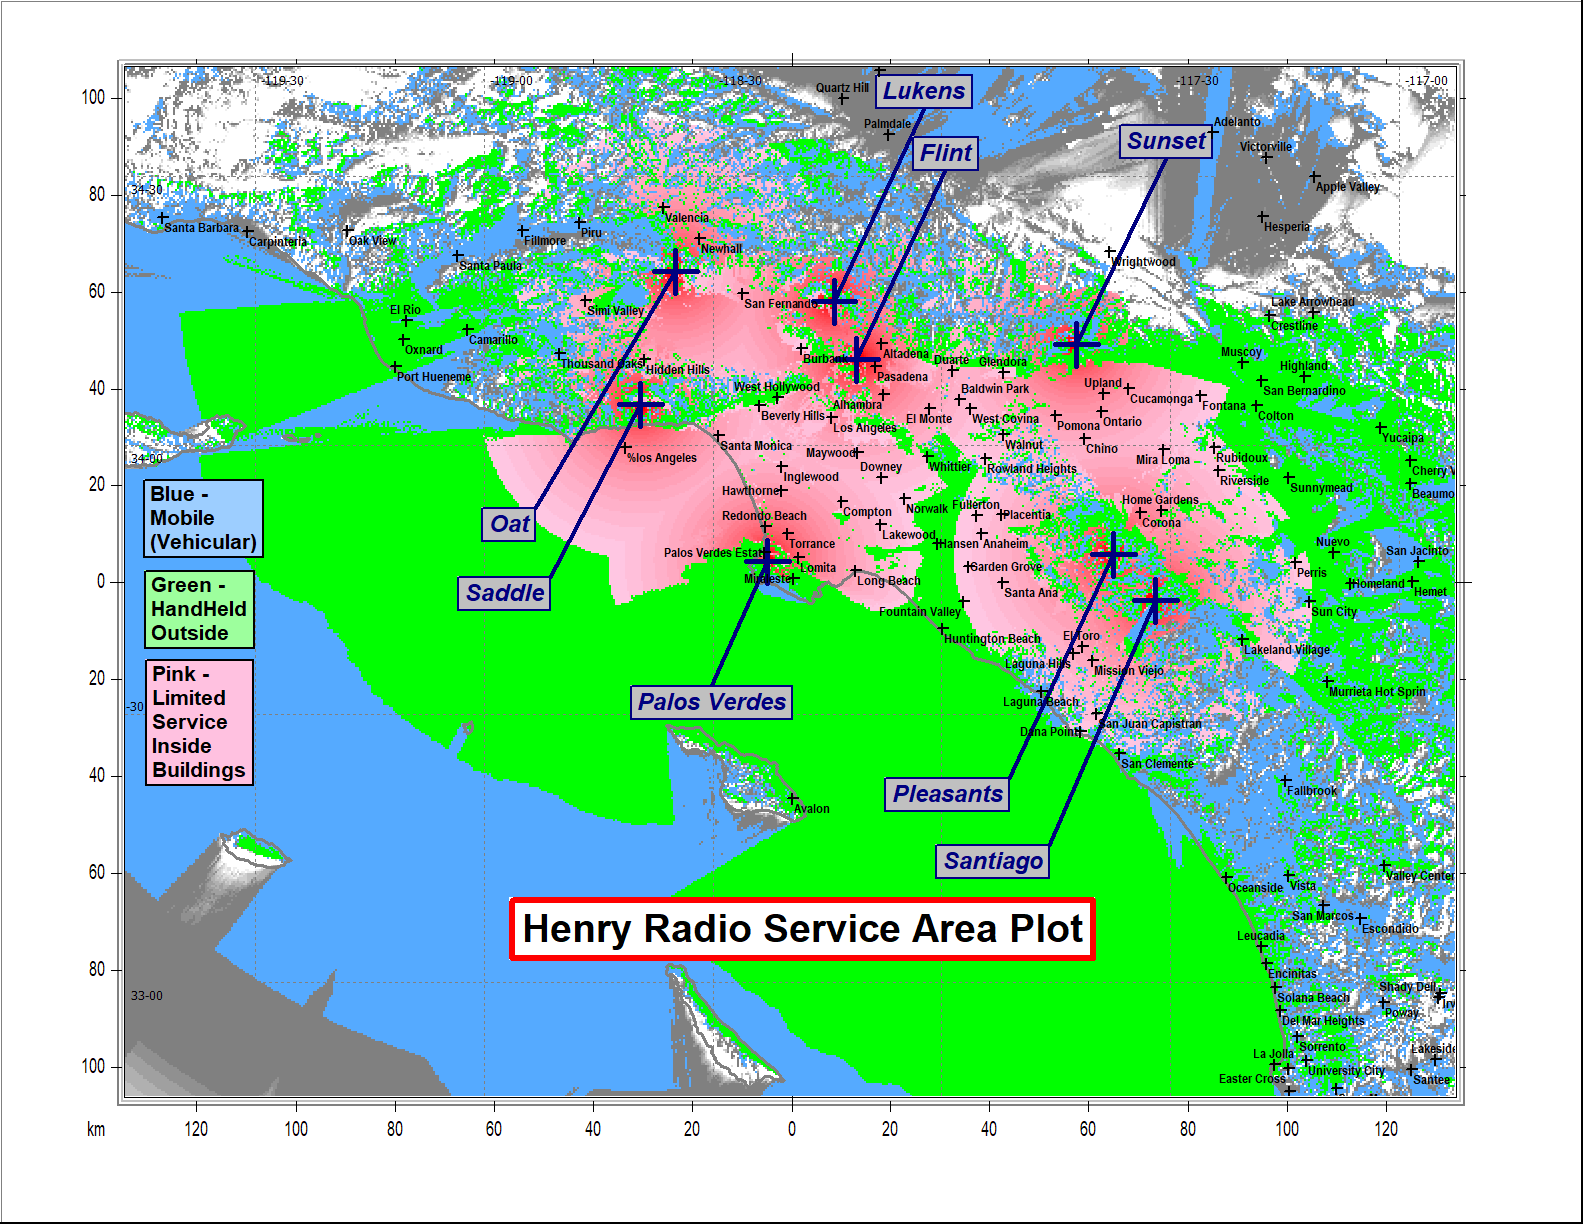 Trunking Map of radio repeater service for Los Angeles and Orange County